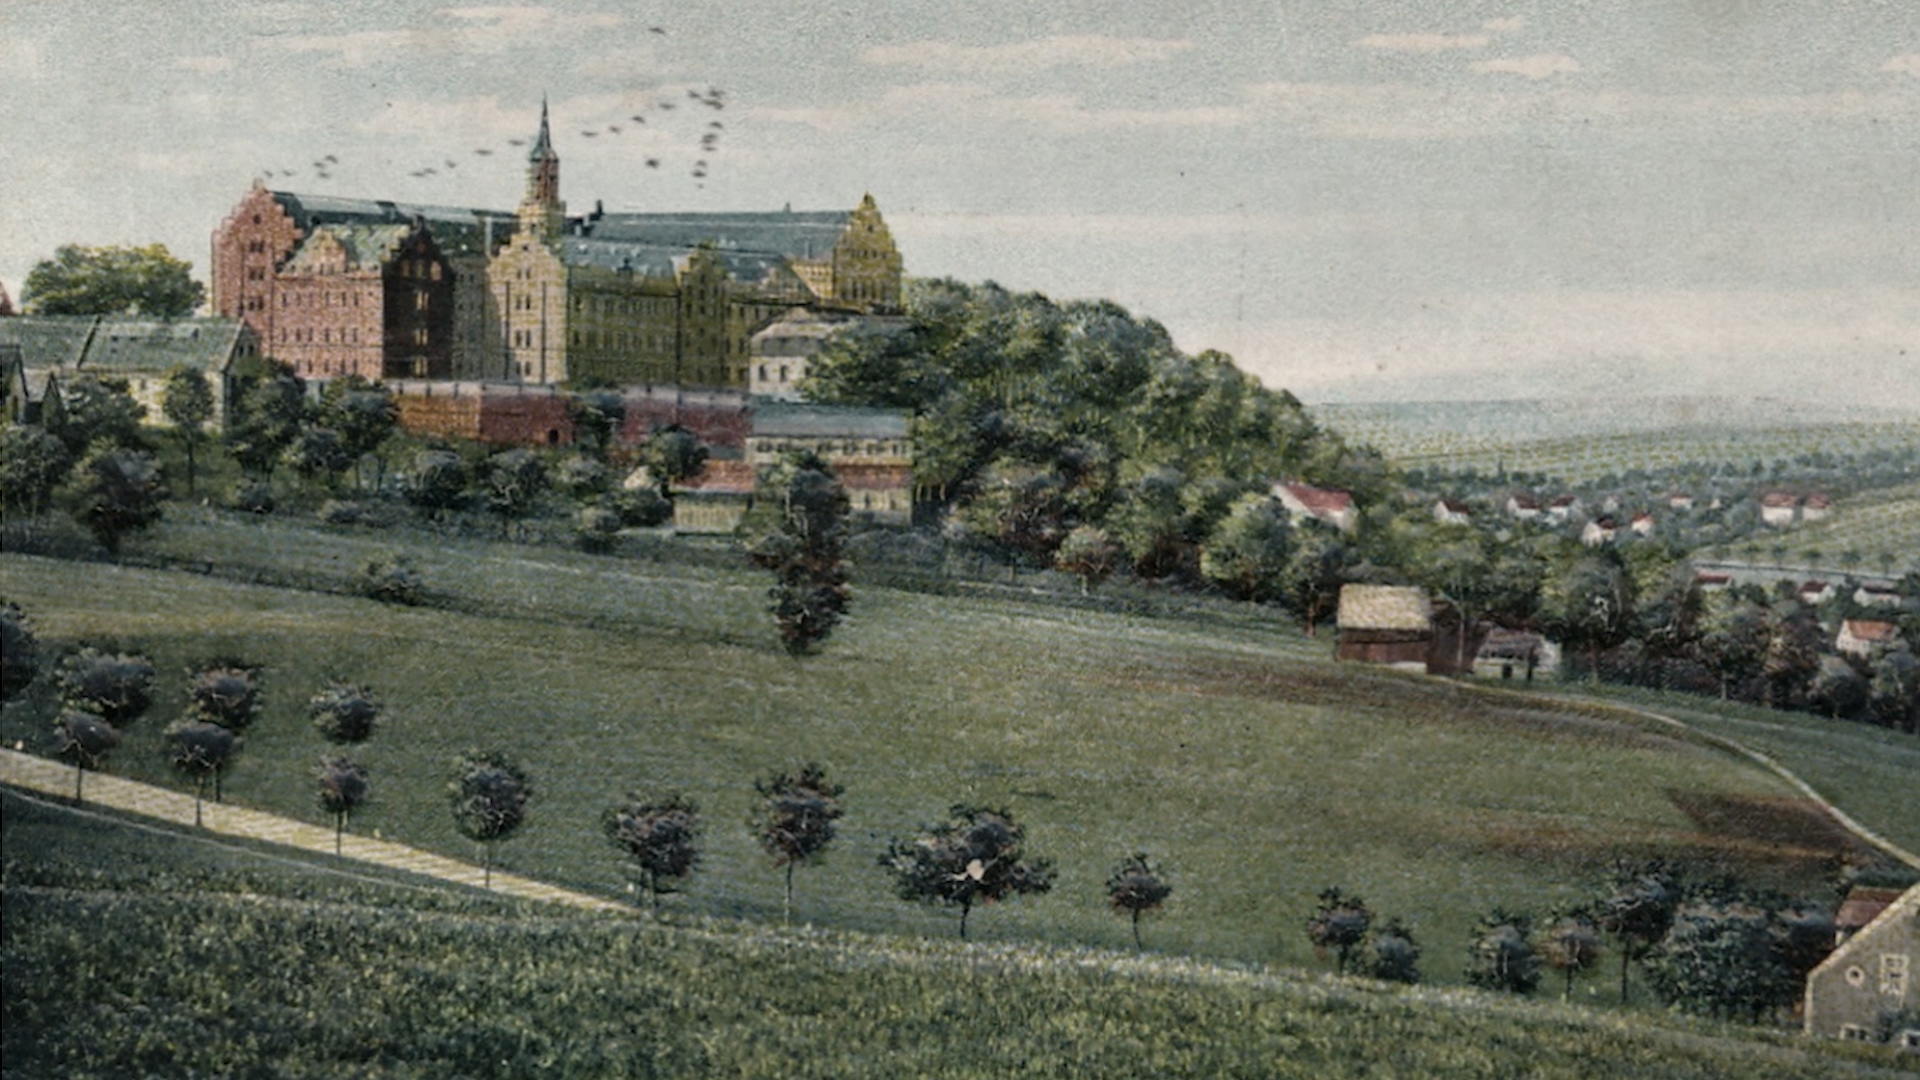 Postcard of the old castle